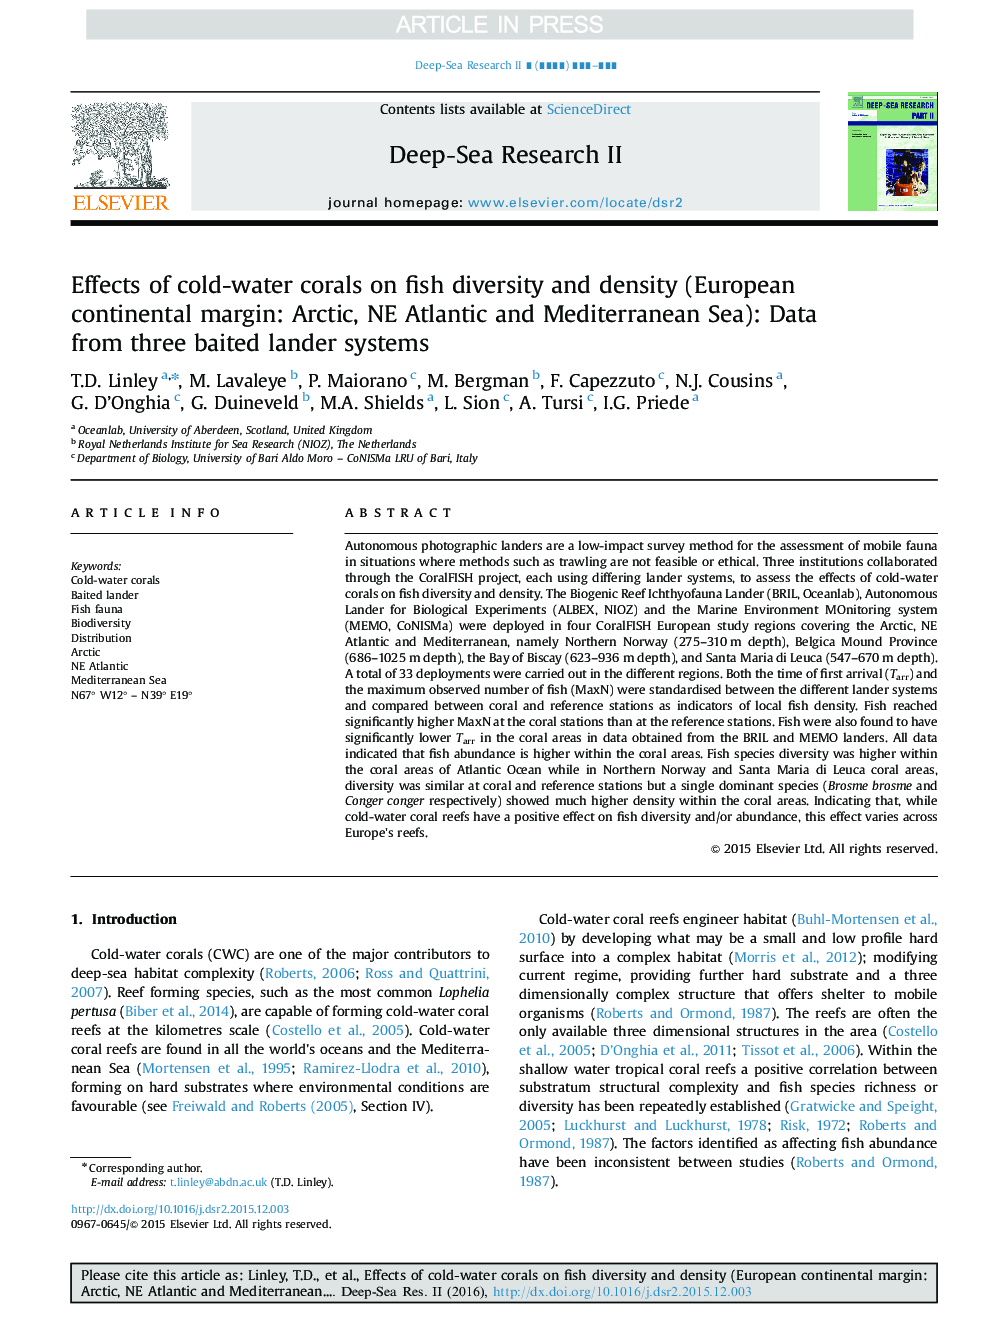 Effects of coldâwater corals on fish diversity and density (European continental margin: Arctic, NE Atlantic and Mediterranean Sea): Data from three baited lander systems